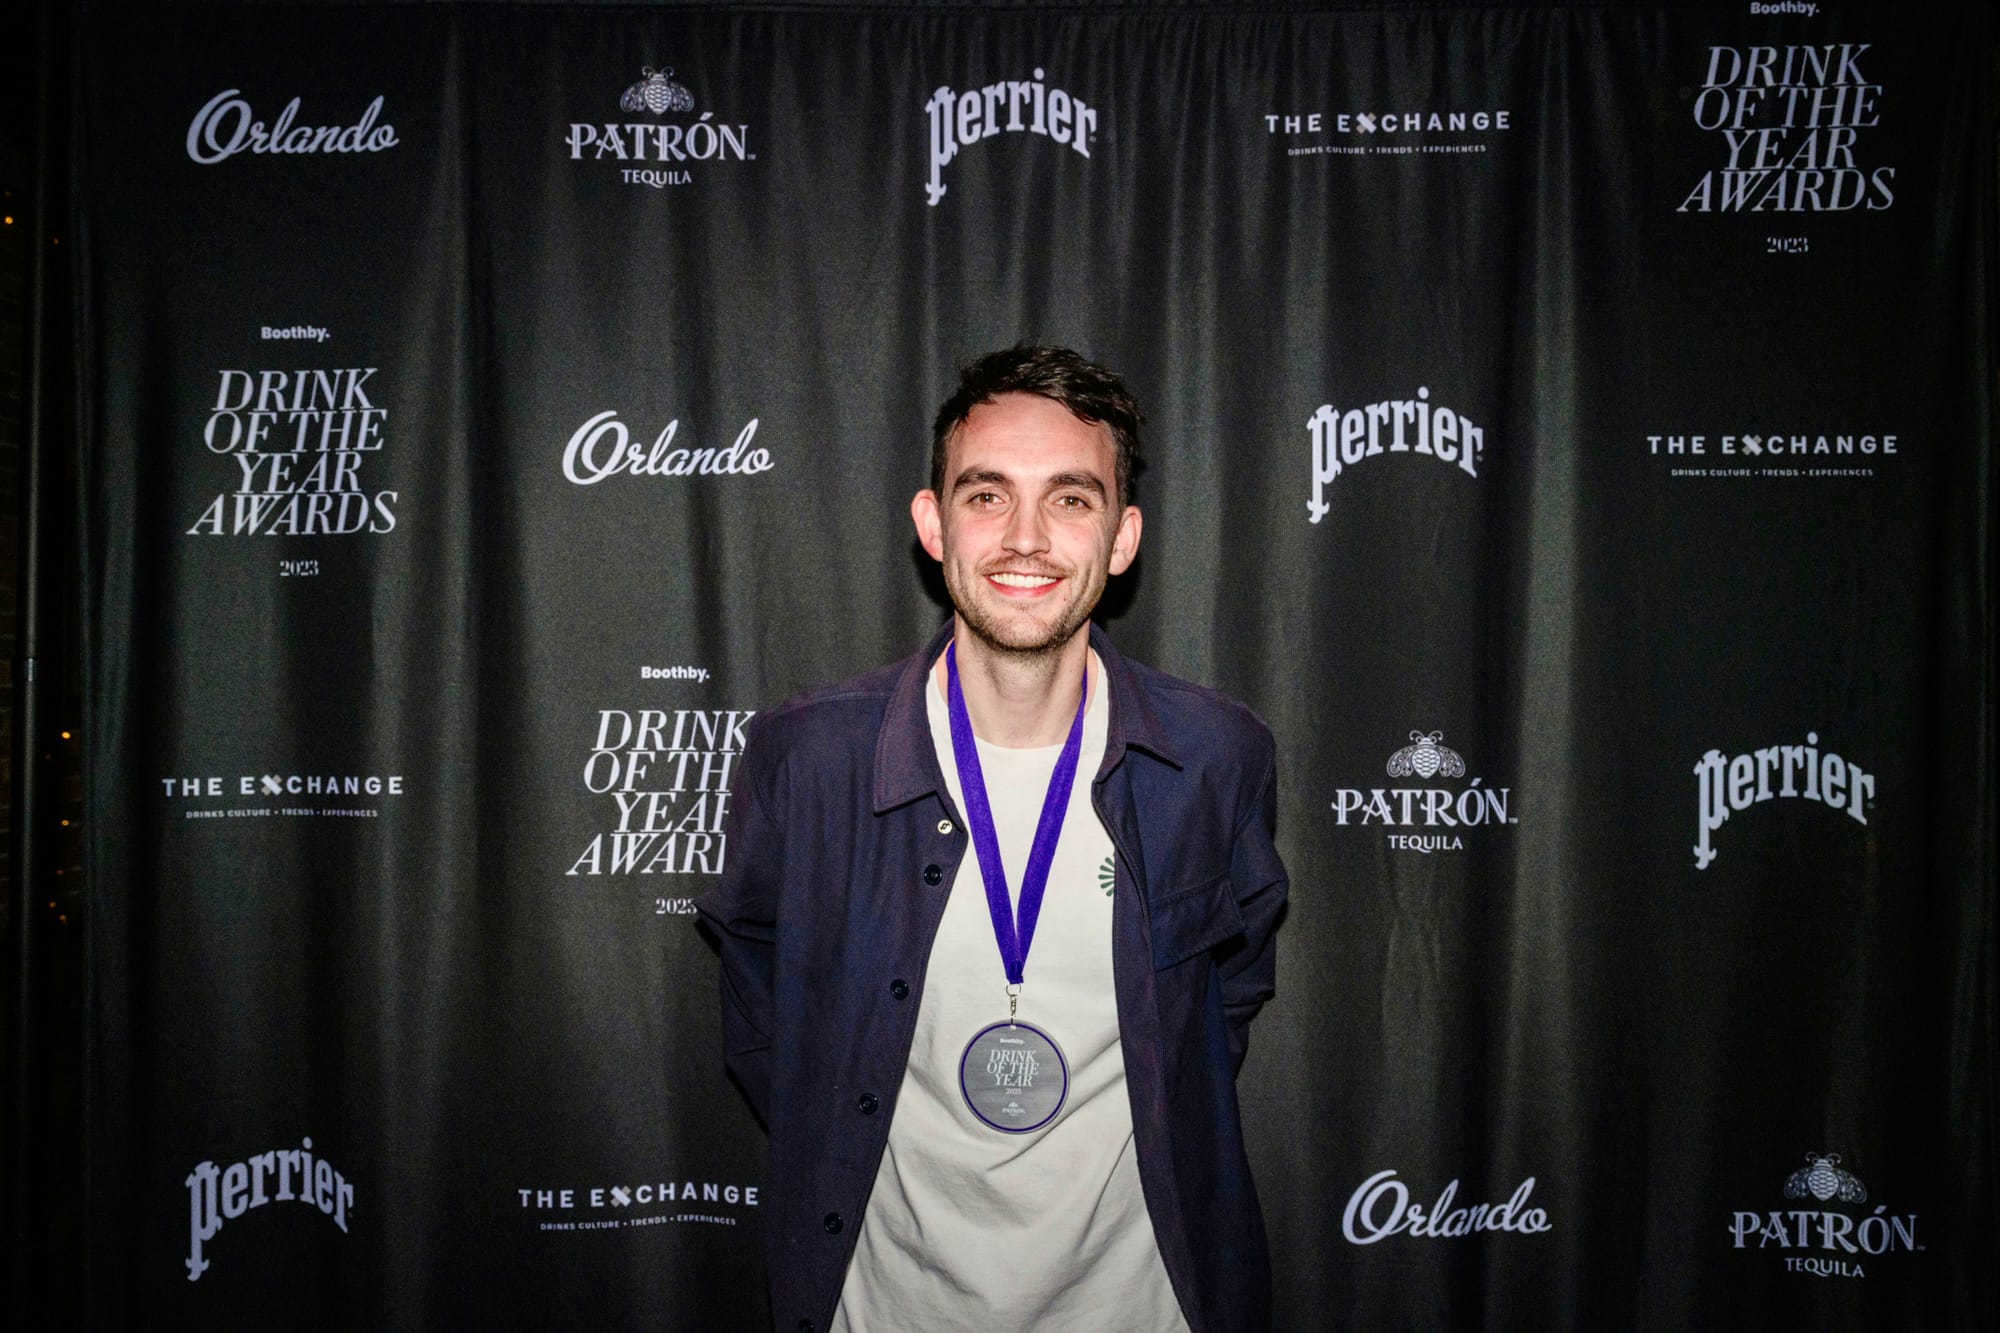 Samuel Thornhill at the 2023 Drink of the Year Awards. Photo: Christopher Pearce